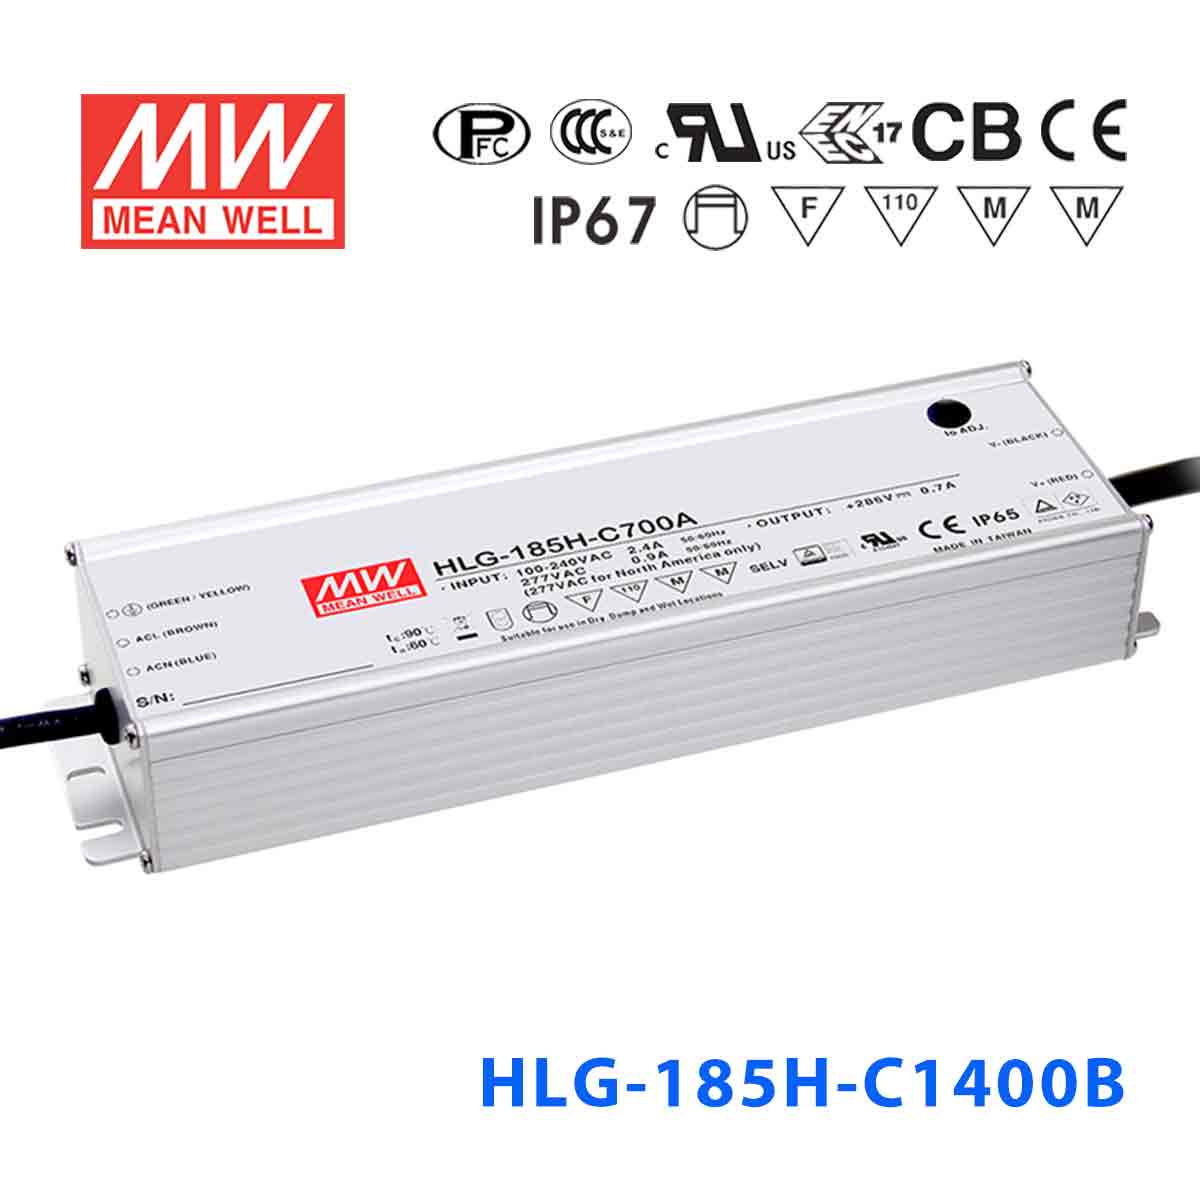 Mean Well HLG-185H-C1400AB Power Supply 200.2W 1400mA - Adjustable and Dimmable